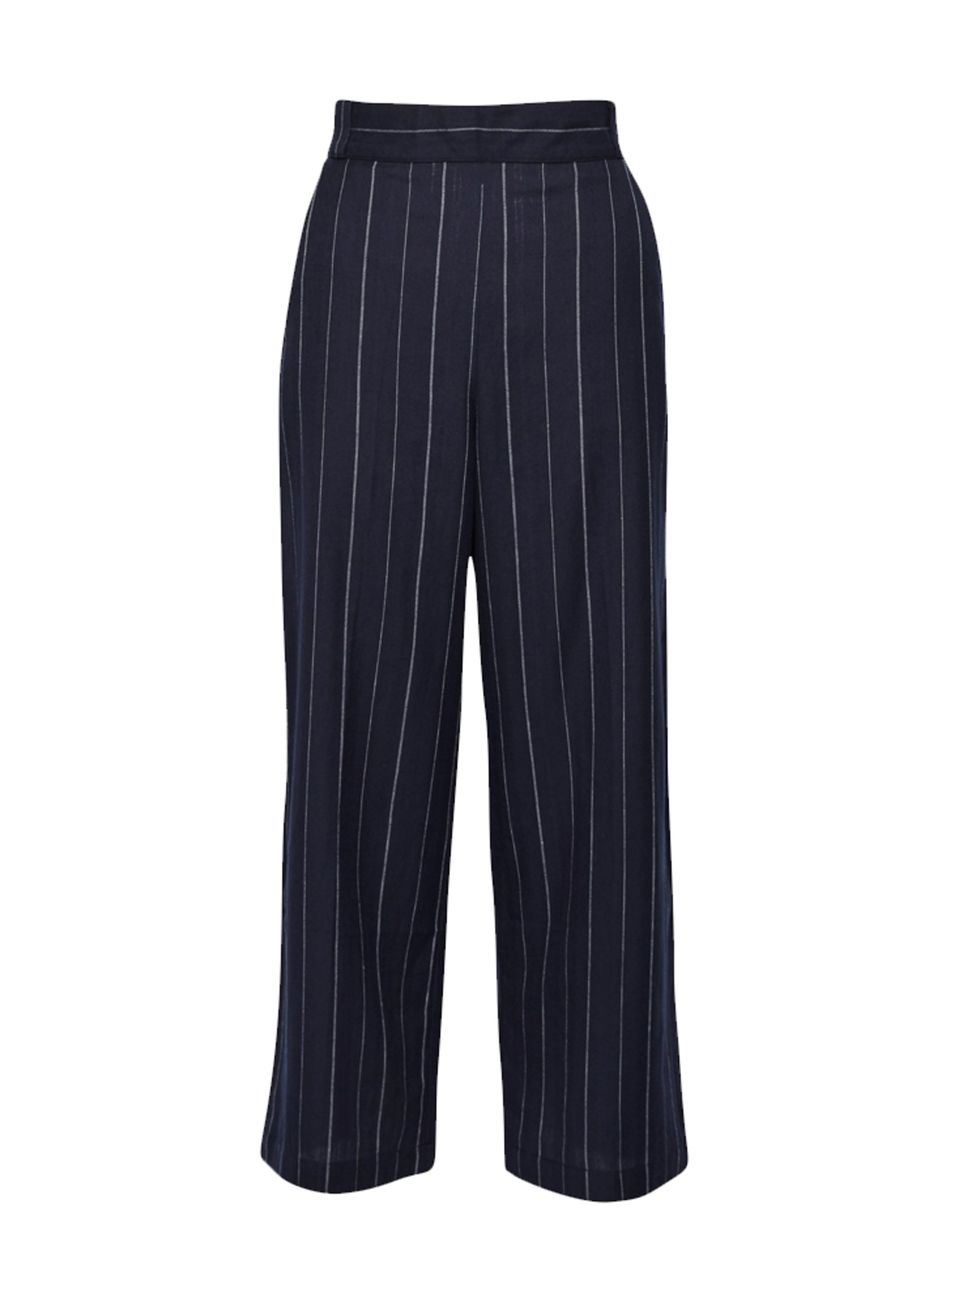 <p><a href="http://www.frenchconnection.com/product/74FAO/Riviera+Stripe+Flared+Trousers.htm?search_keywords=stripes" target="_blank">French Connection</a> wide legged cropped trousers, £85</p>